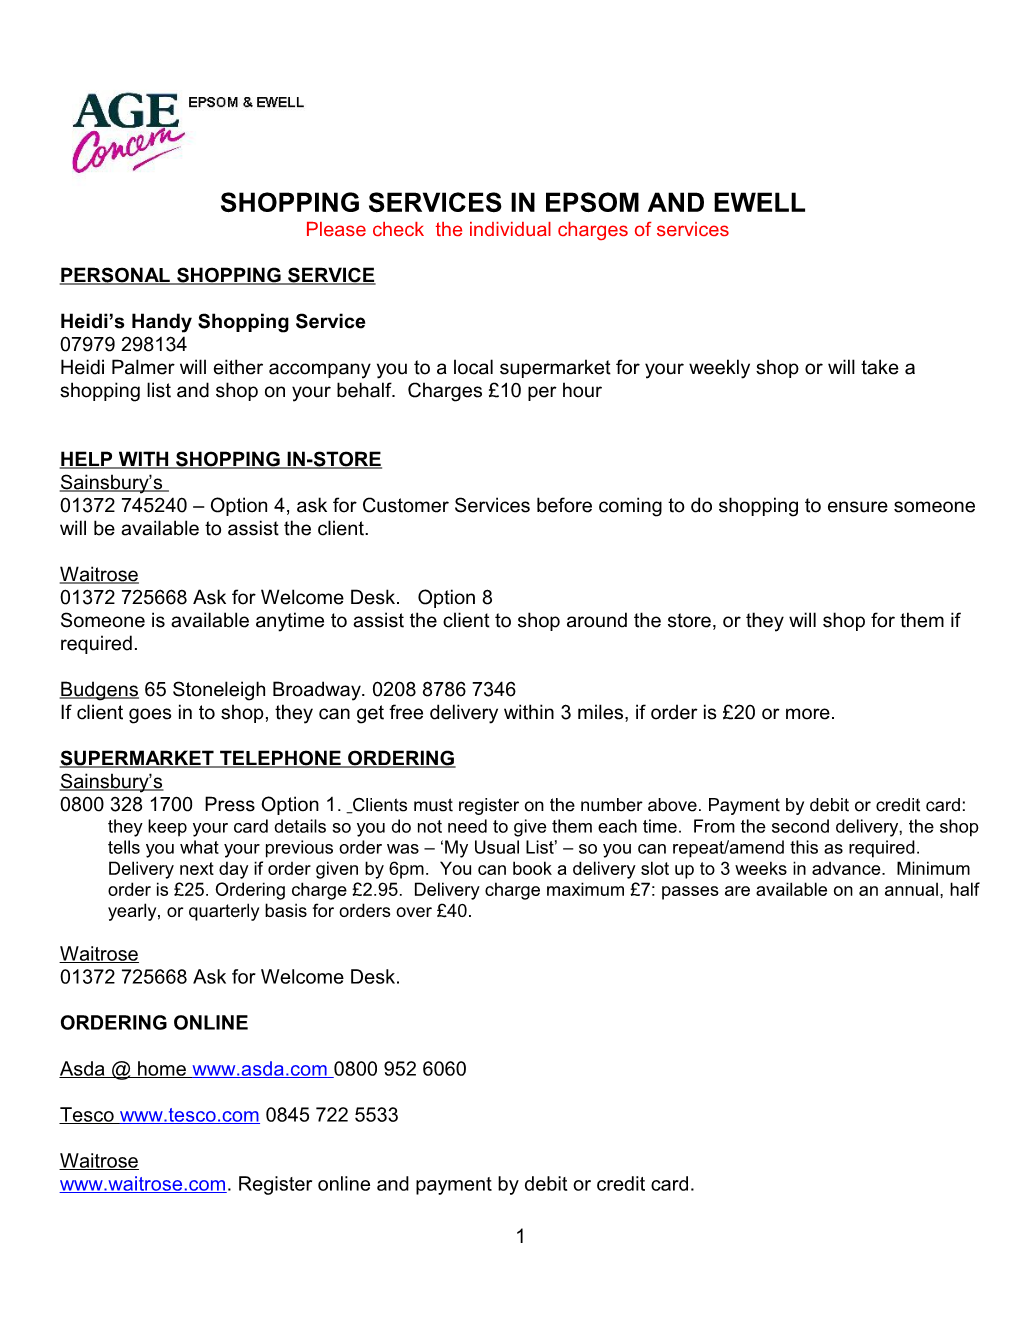 Shopping Services in Epsom and Ewell